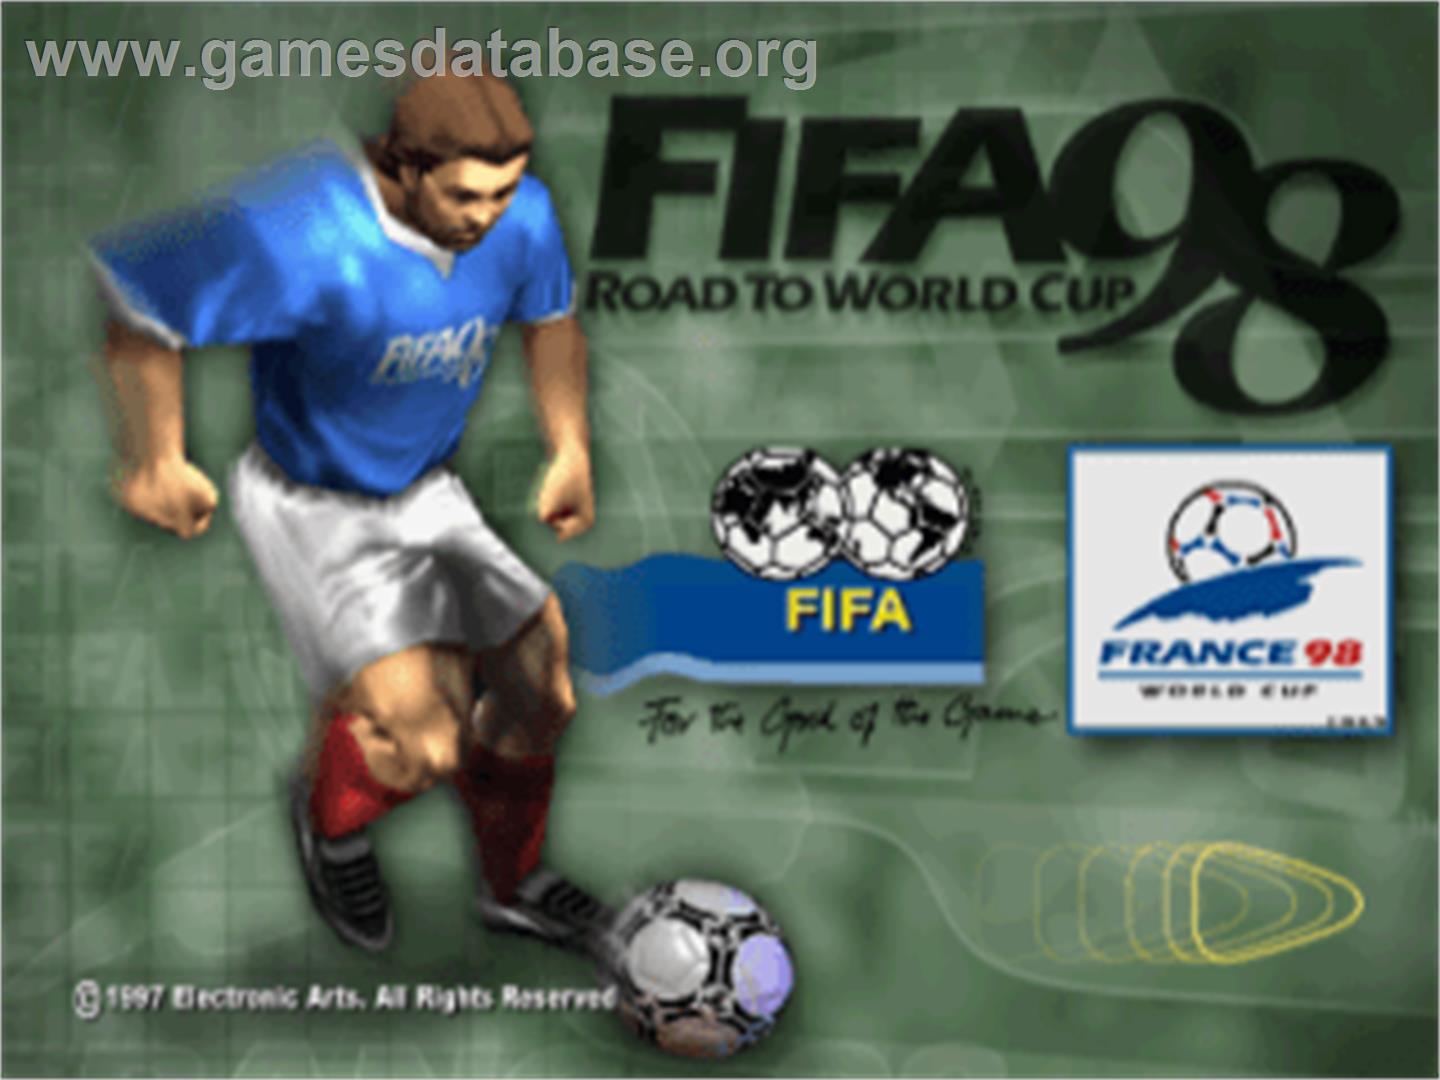 FIFA 98: Road to World Cup - Sony Playstation - Artwork - Title Screen